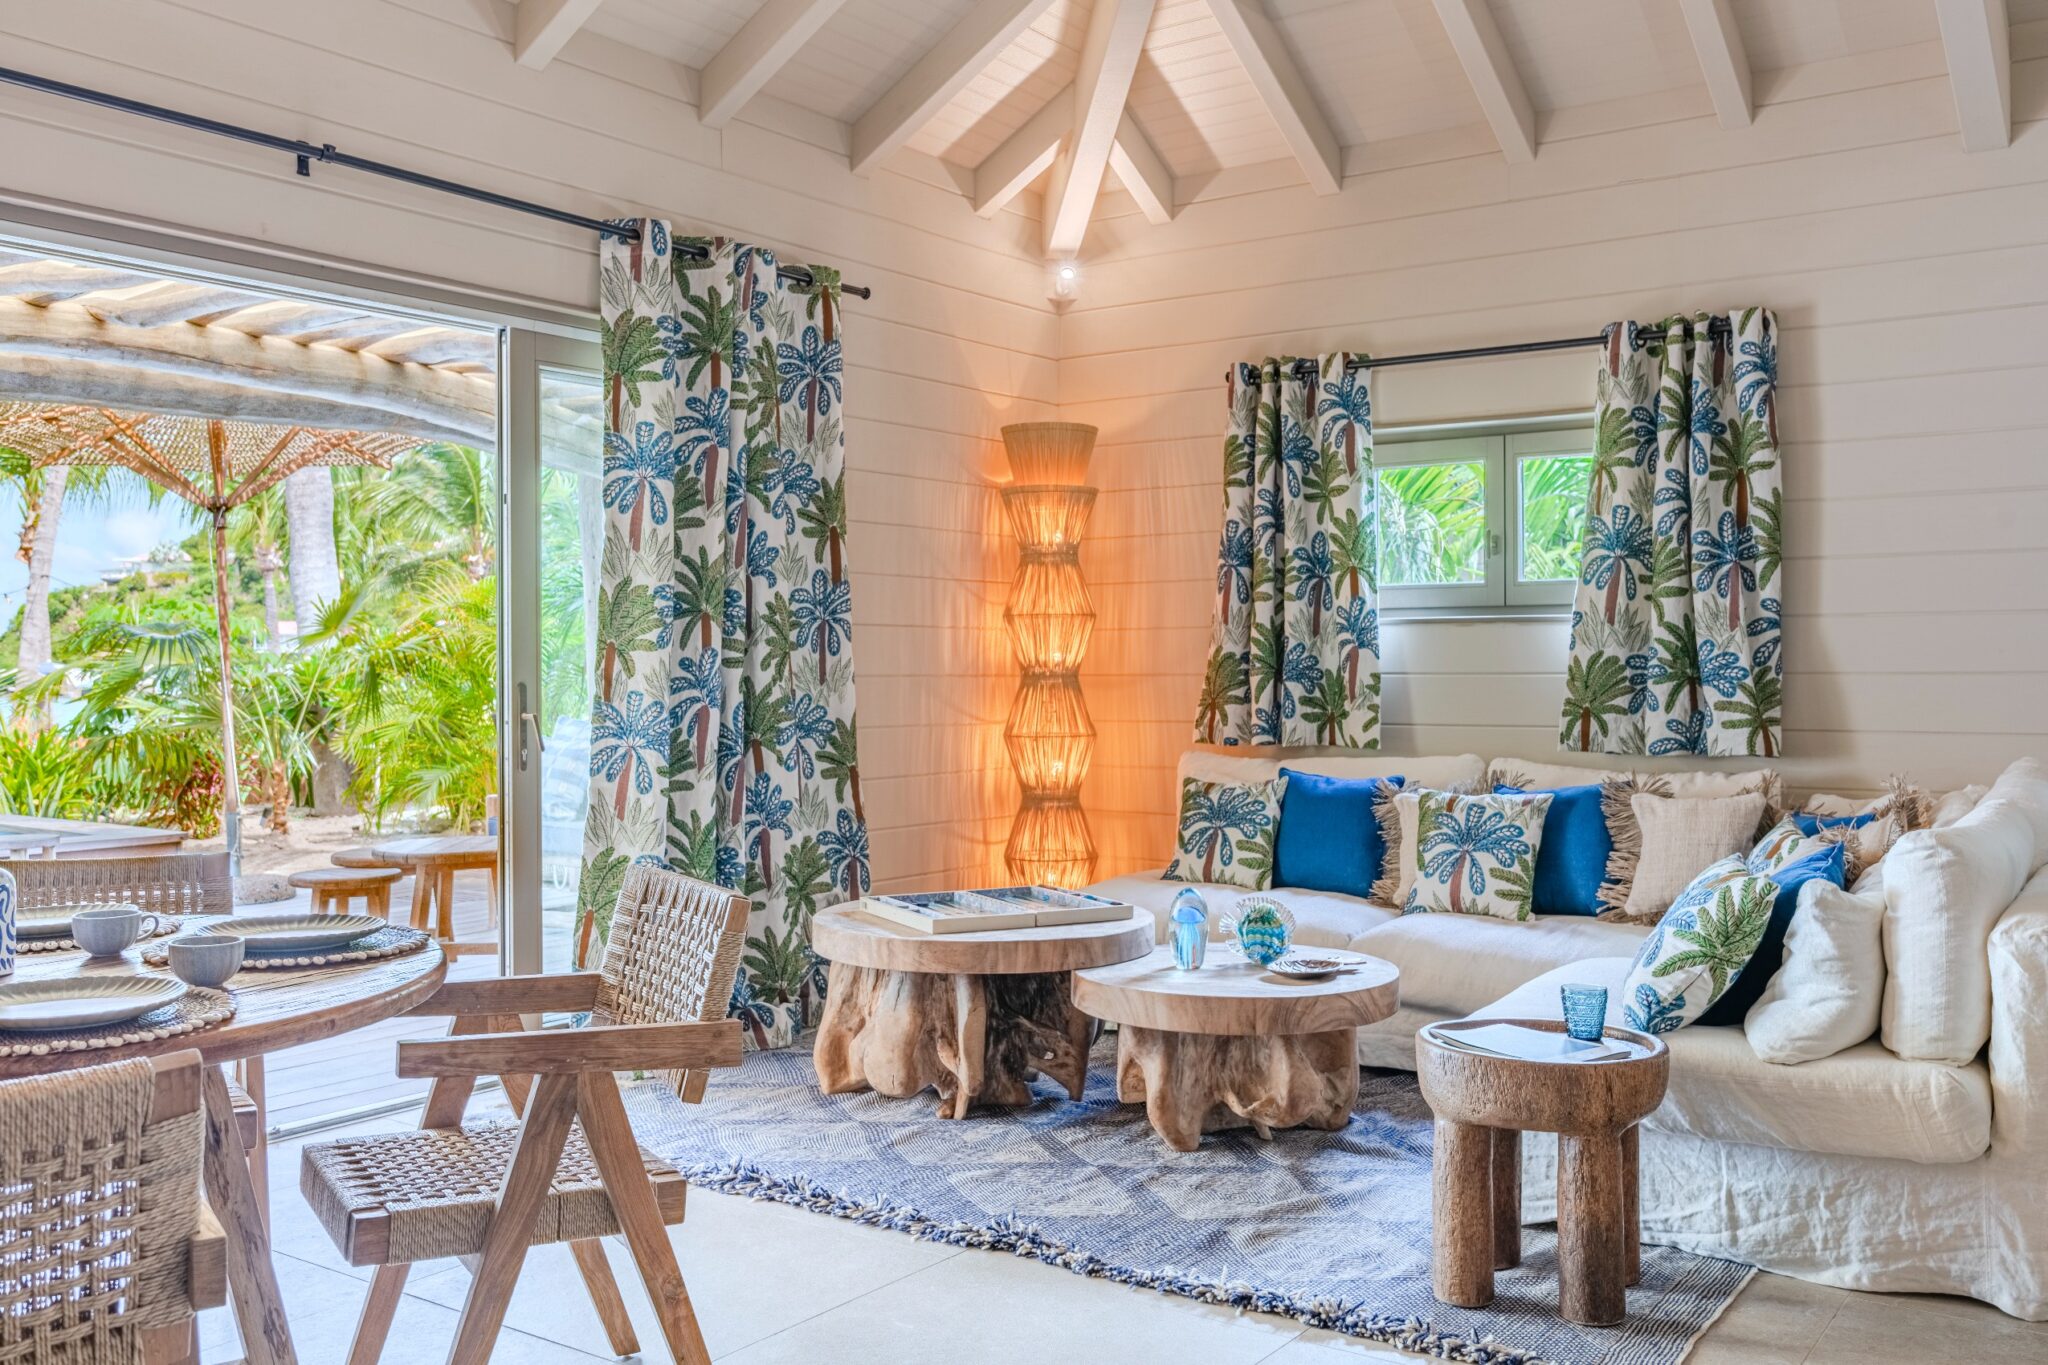 Barefoot Luxury is Redefined at St. Barts' Gyp Sea Beach Houses